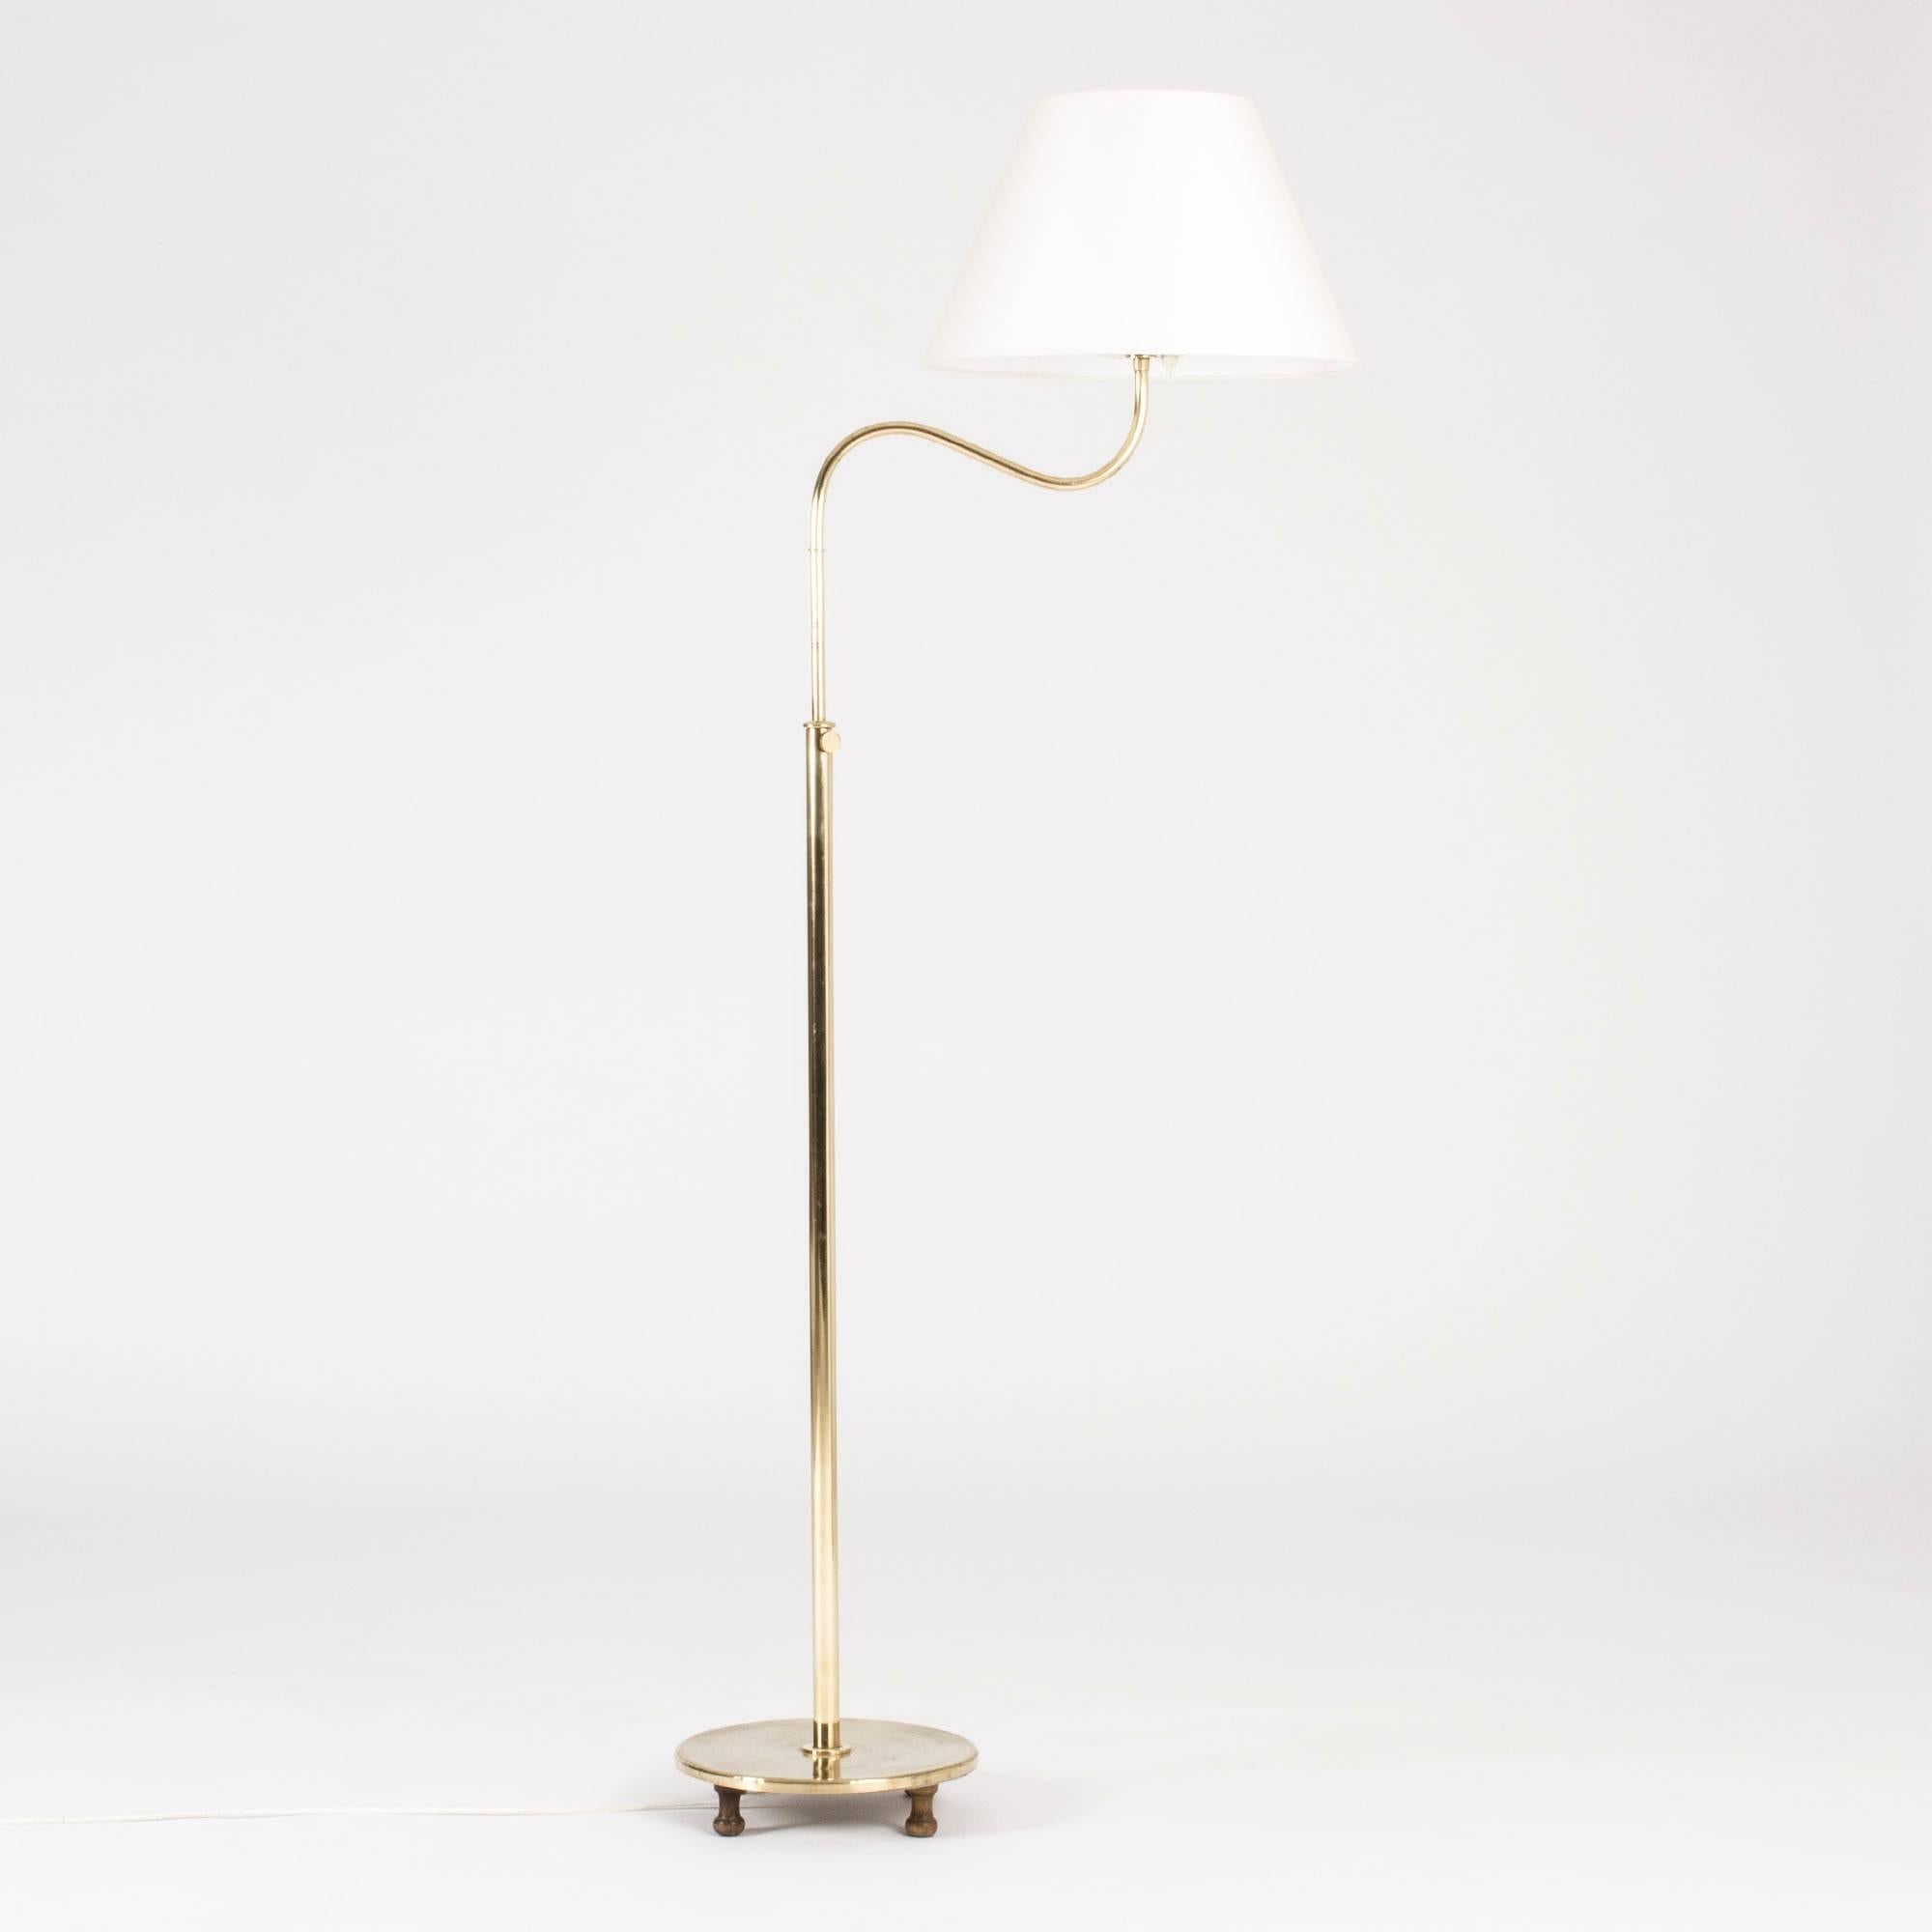 Beautiful, poised “Camel” floor lamp by Josef Frank, made from brass. Adjustable height. The disc base is elevated by little sculpted wooden feet.
The height is adjustable between 145 and 160 cm. The diameter of the lamp shade 40 cm and the